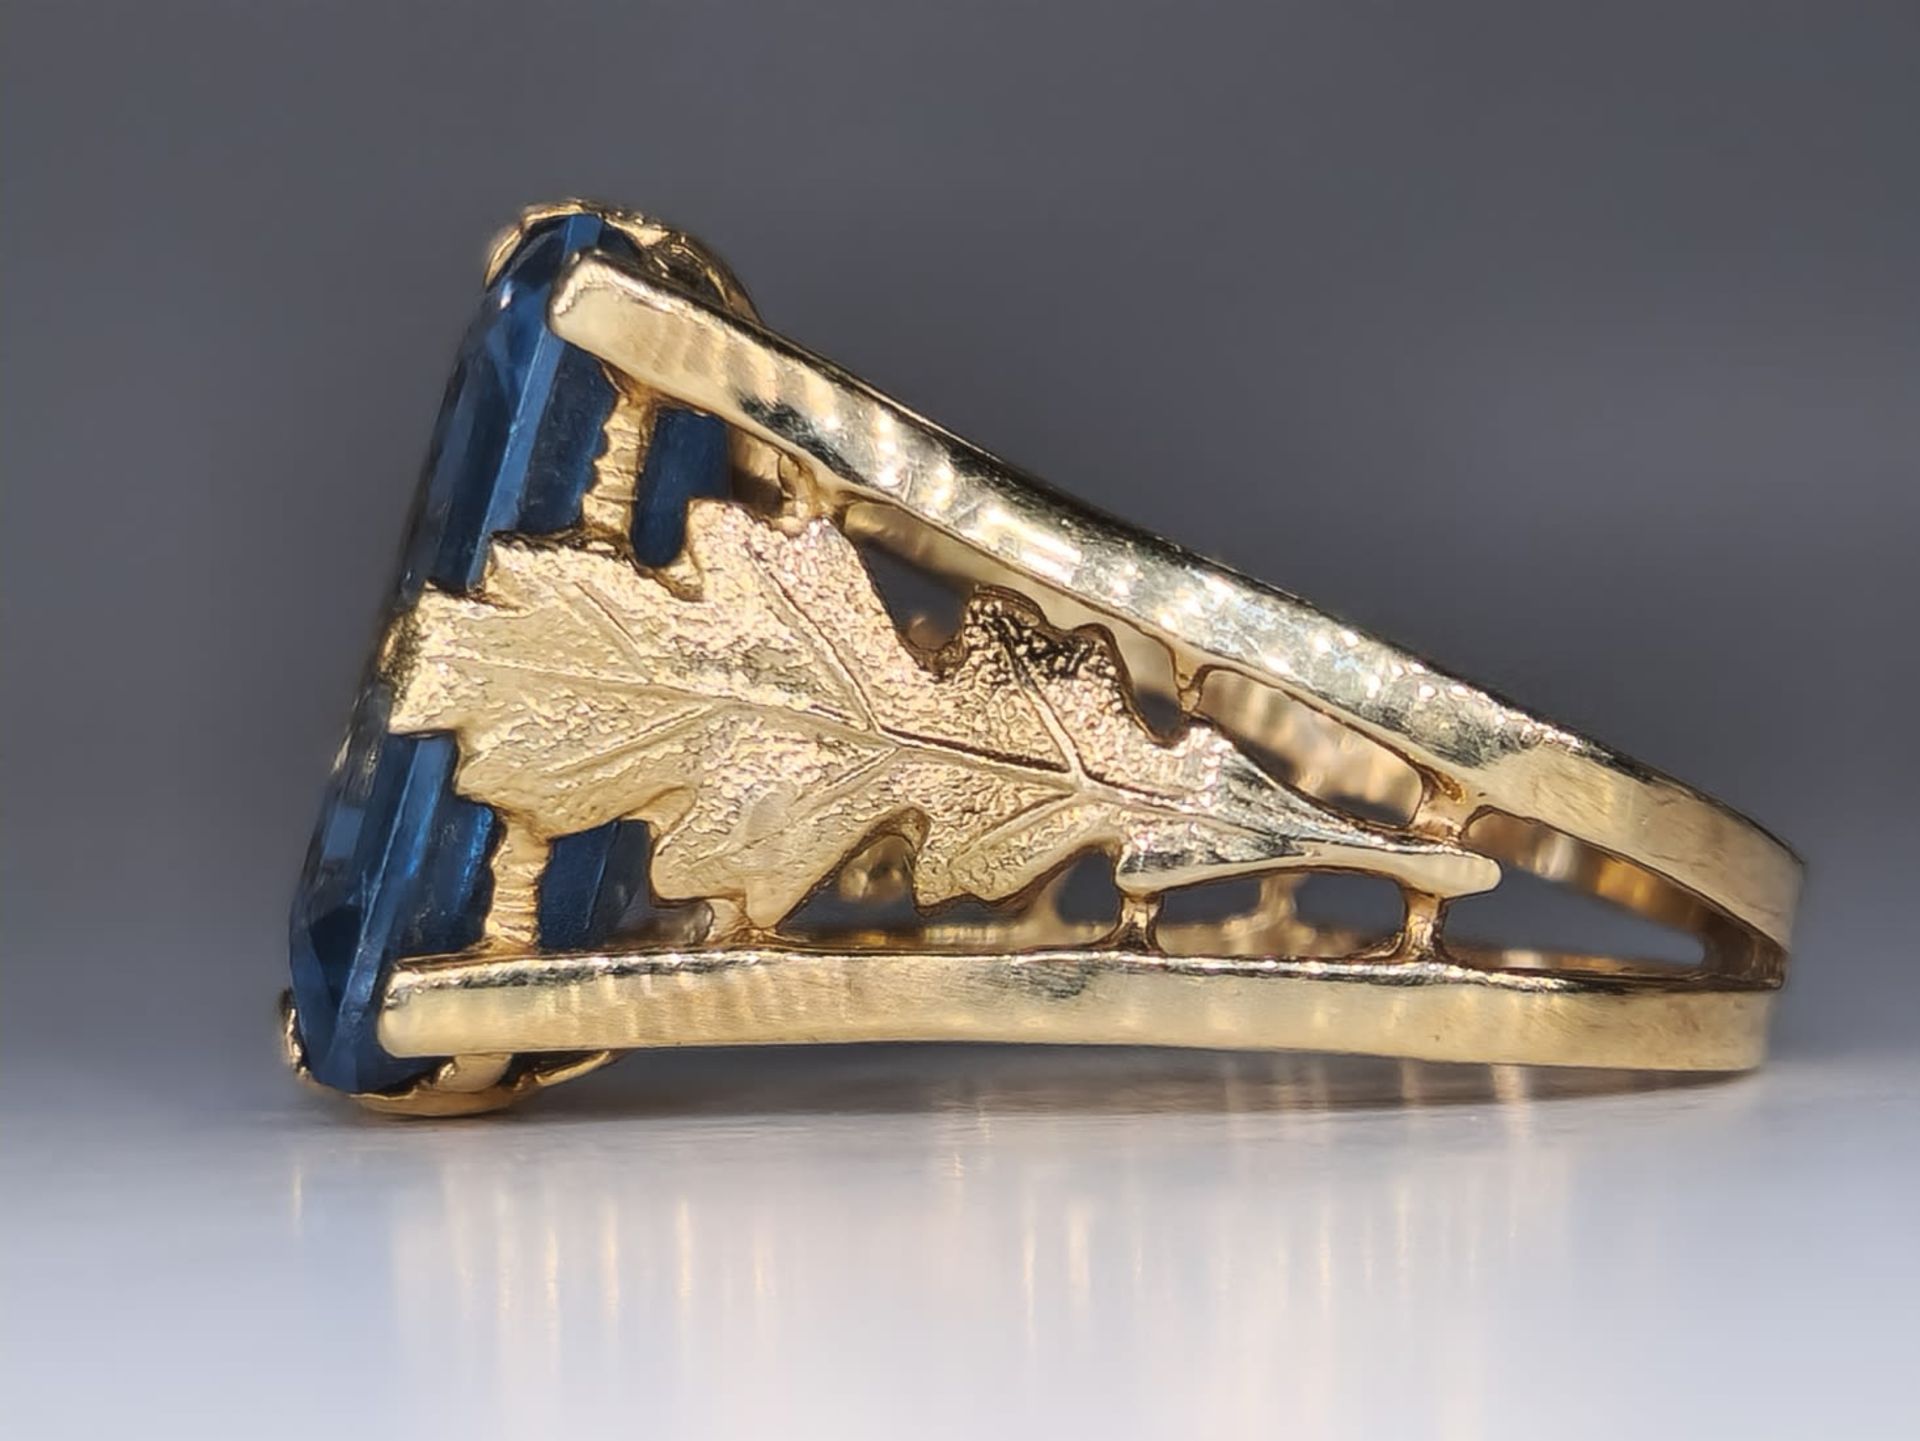 An antique and beautiful Art Nouveau ring, 14K gold, signed, designed as leaves holding a polished - Bild 4 aus 7